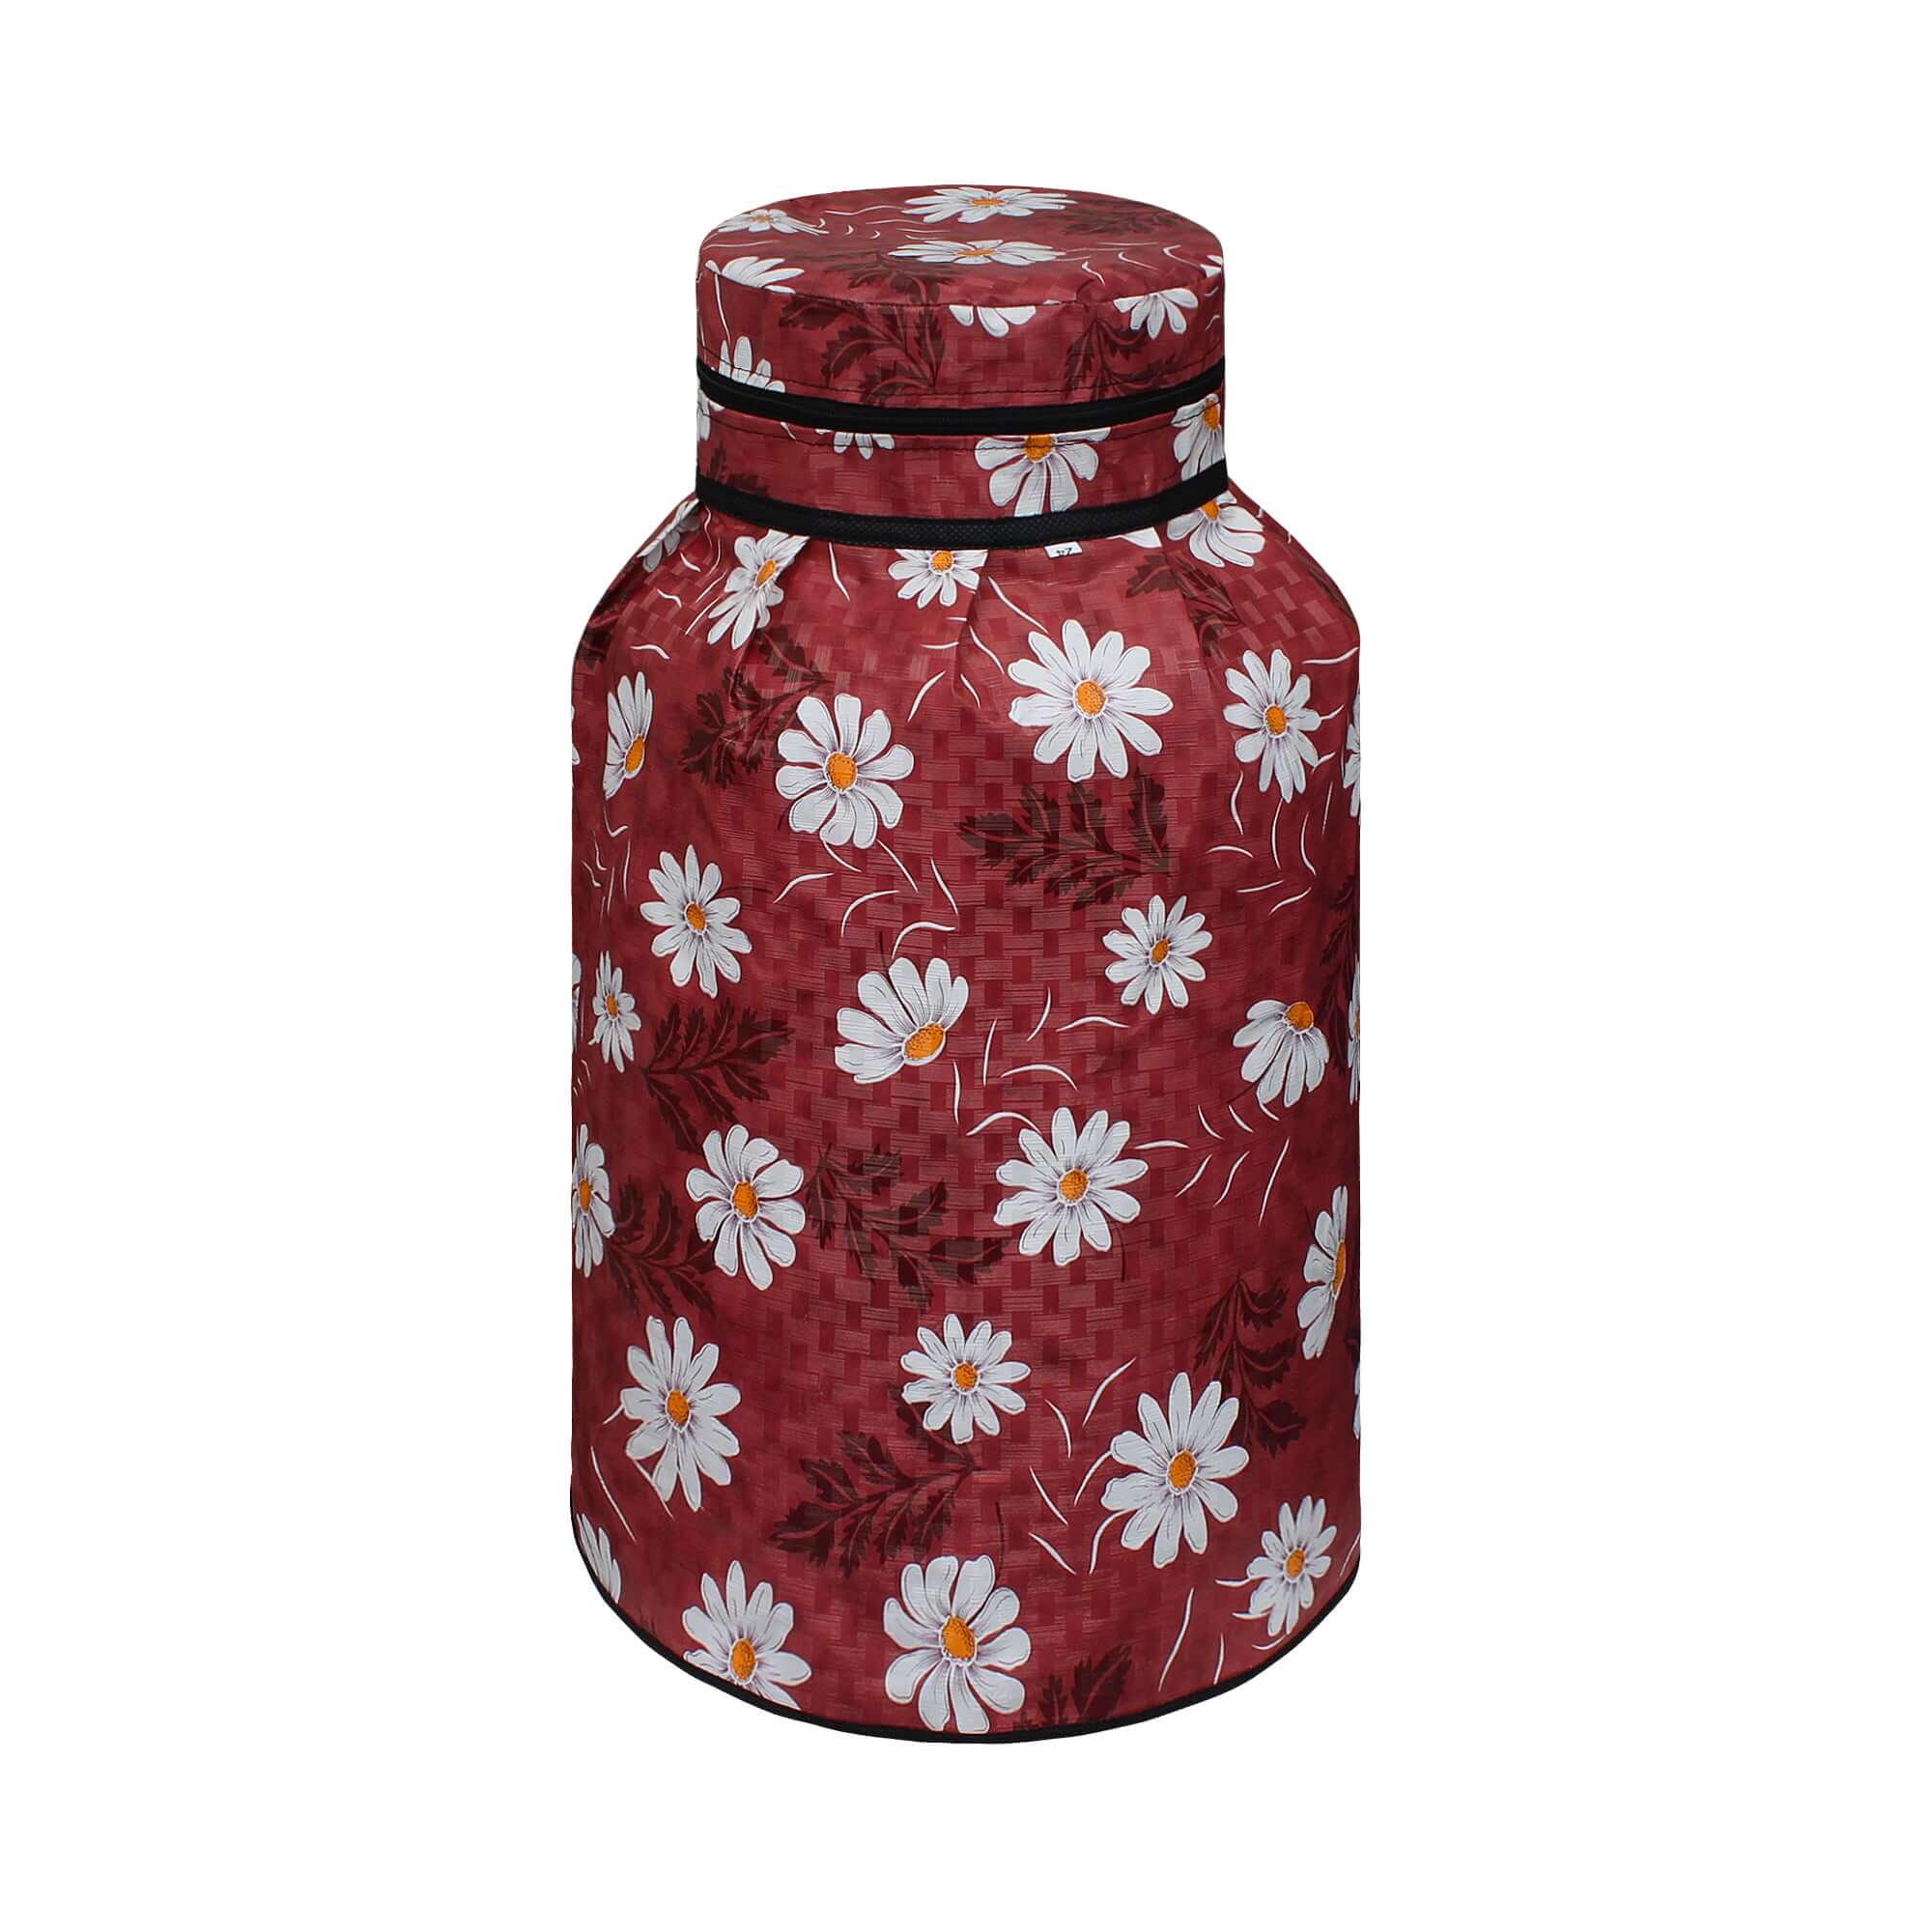 LPG Gas Cylinder Cover, SA08 - Dream Care Furnishings Private Limited